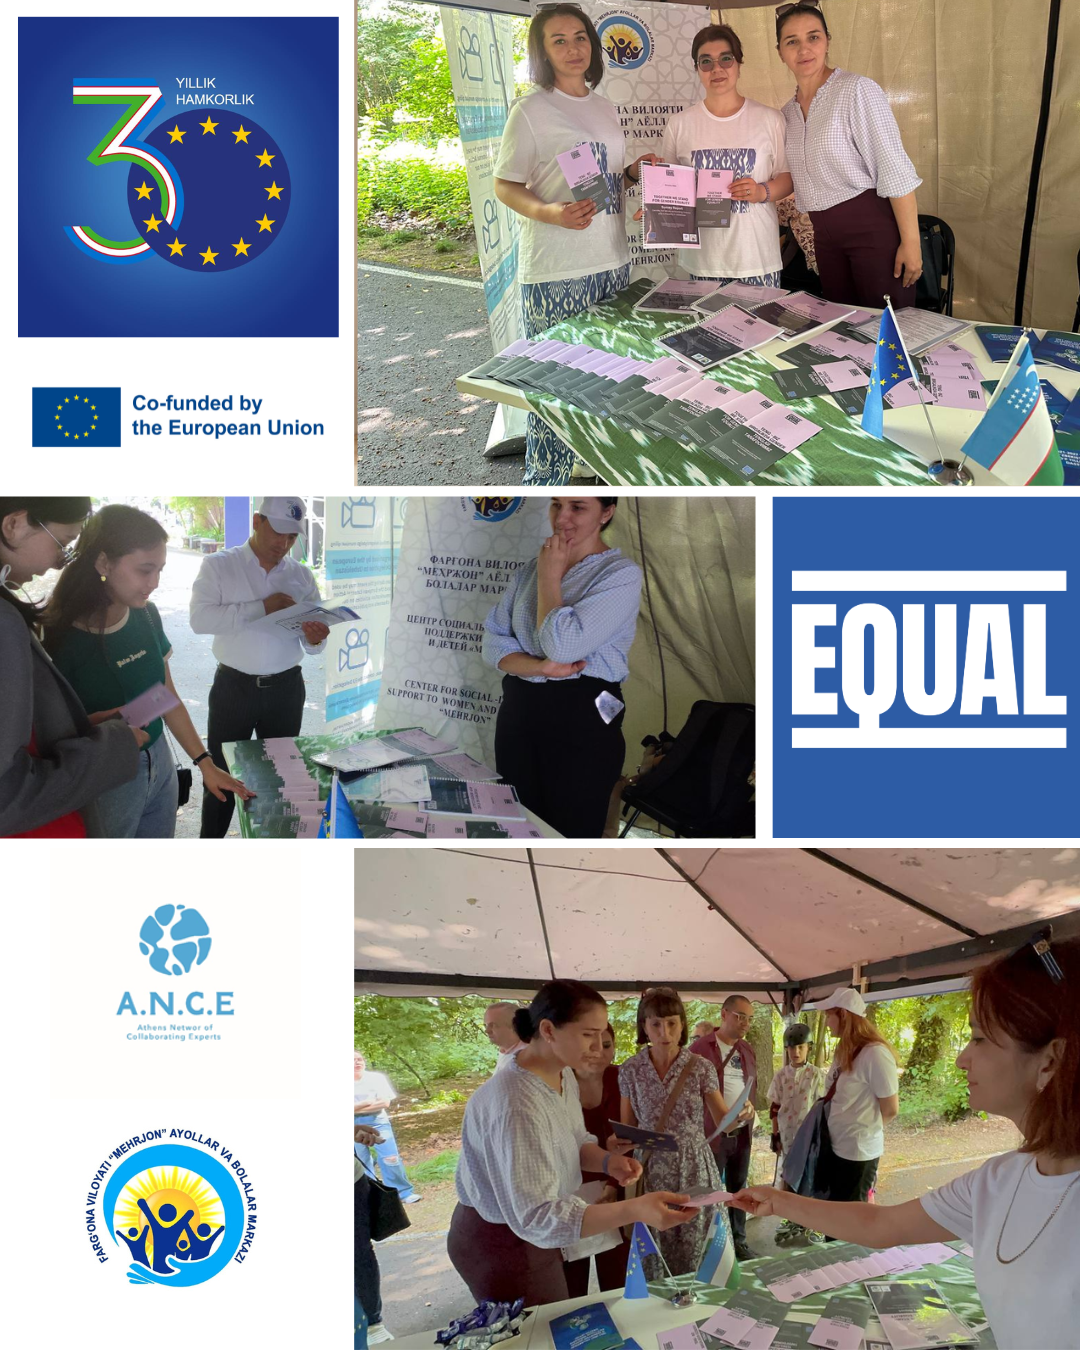 EQUAL Project at the European Union Festival